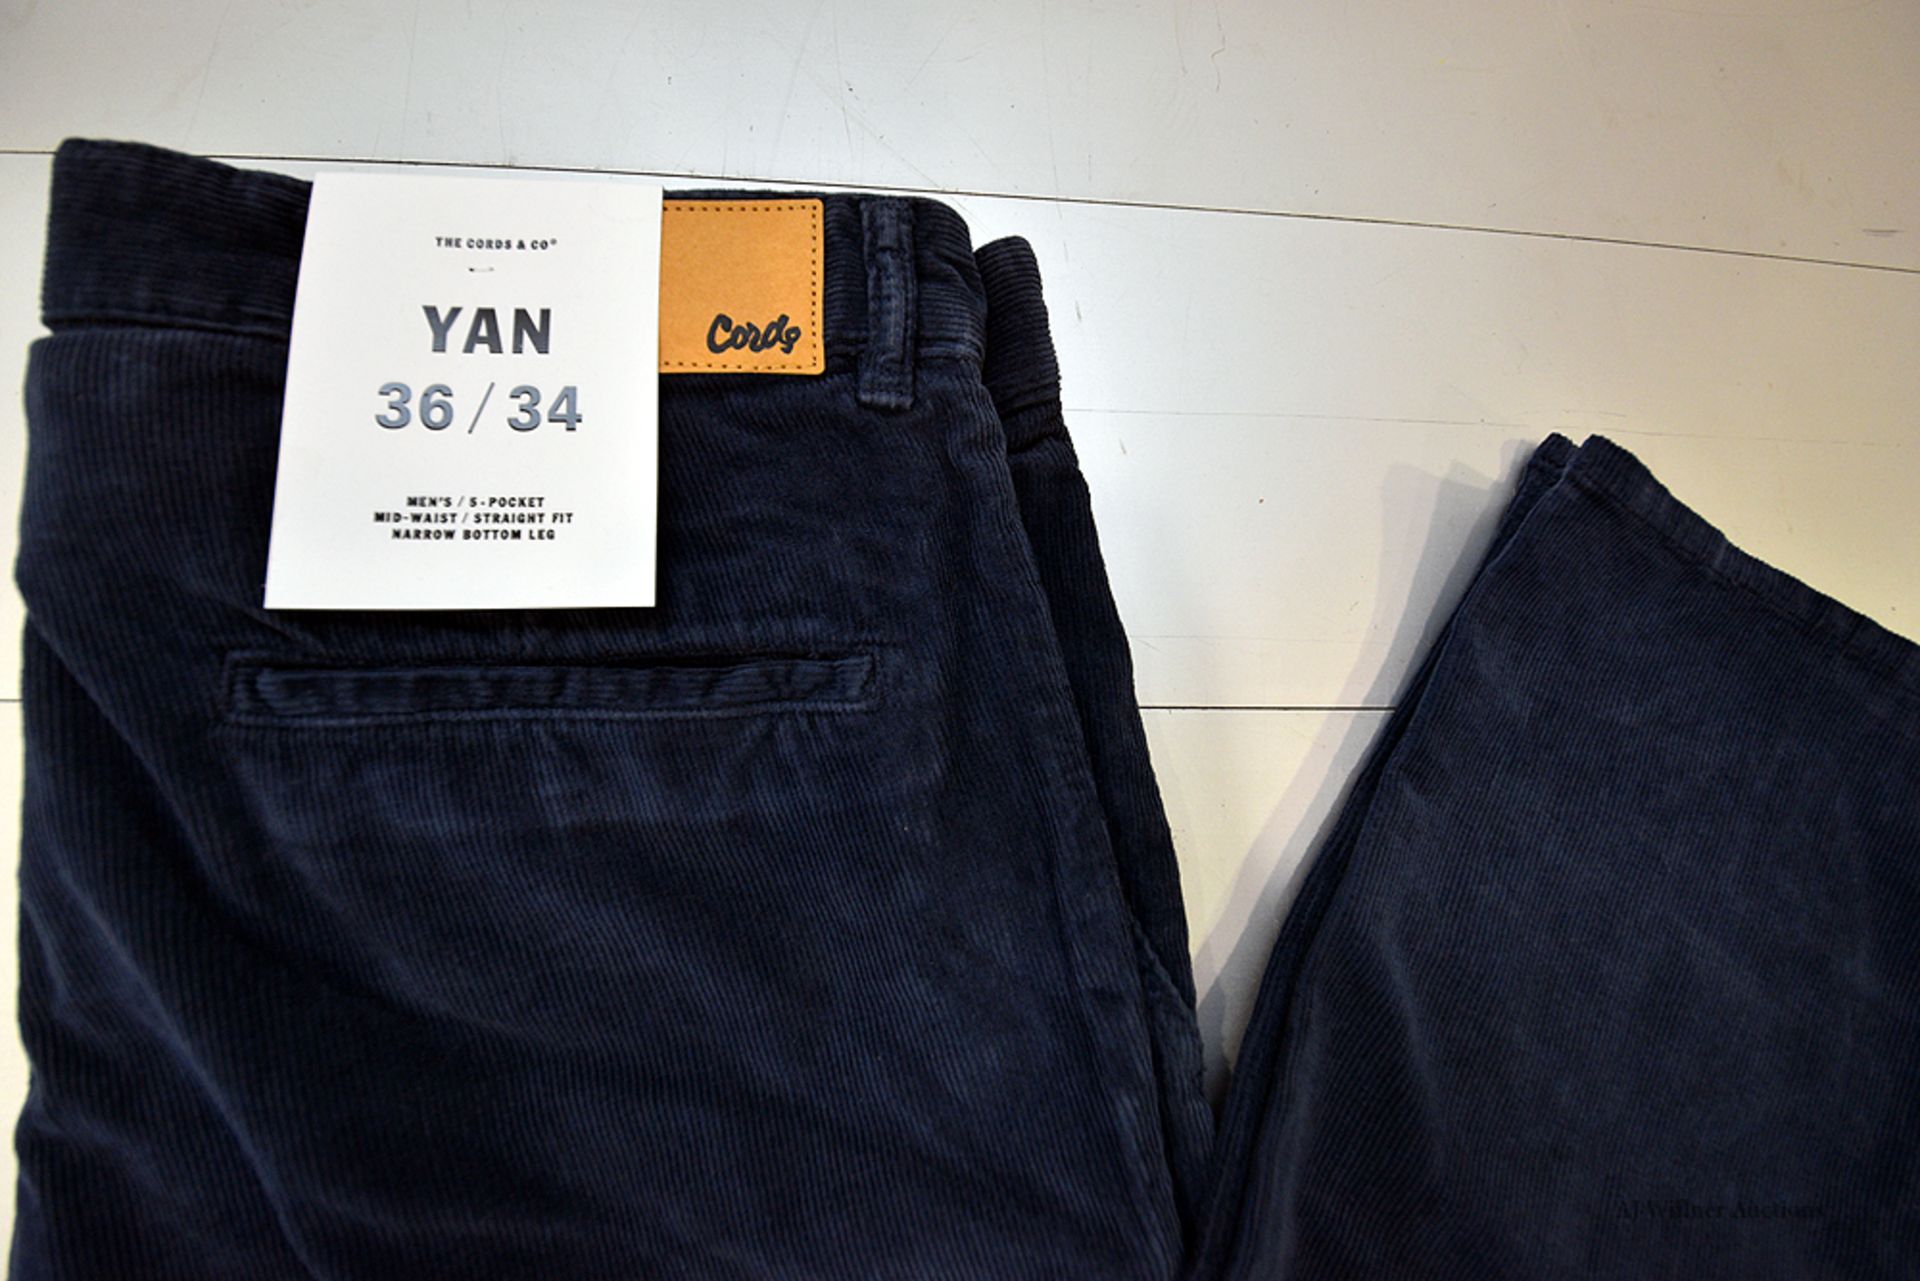 The Cords & Co. "Yan" Mens/Mid-Waist/Straight Fit/Narrow Leg Pants MSRP $160 - Image 4 of 6